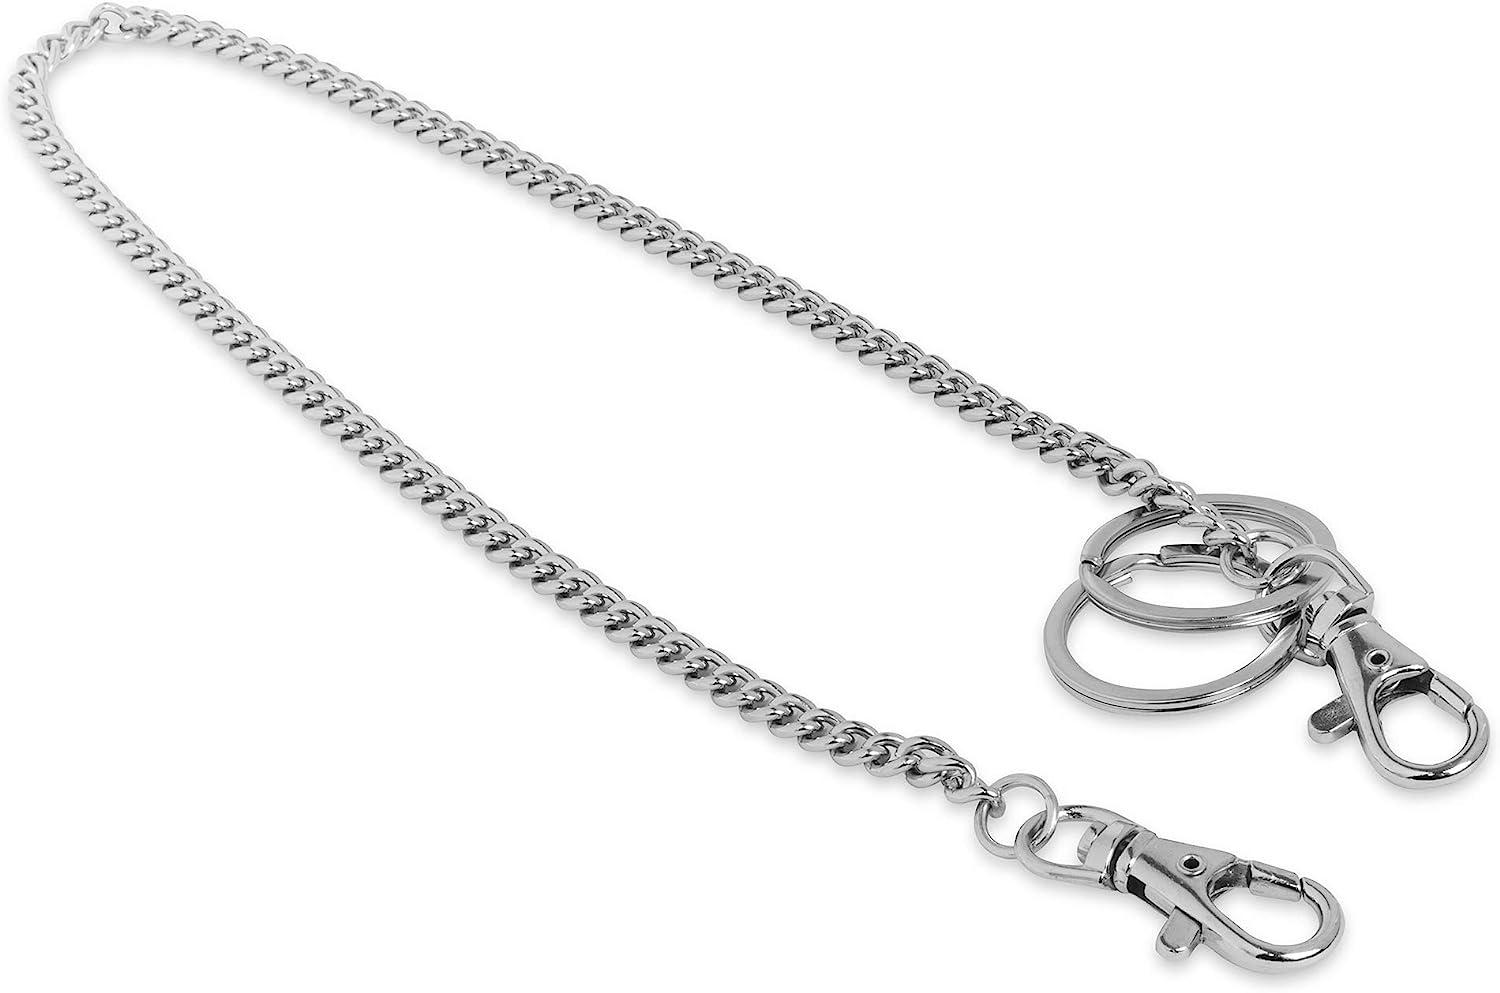 18 Silver Nickel Plated Pocket Keychain String with Both Ends Lobster Claw  Clasp Trigger Snap Handle for Belt Loop, Purse Handbag Strap, Keys, Wallet,  and Traveling